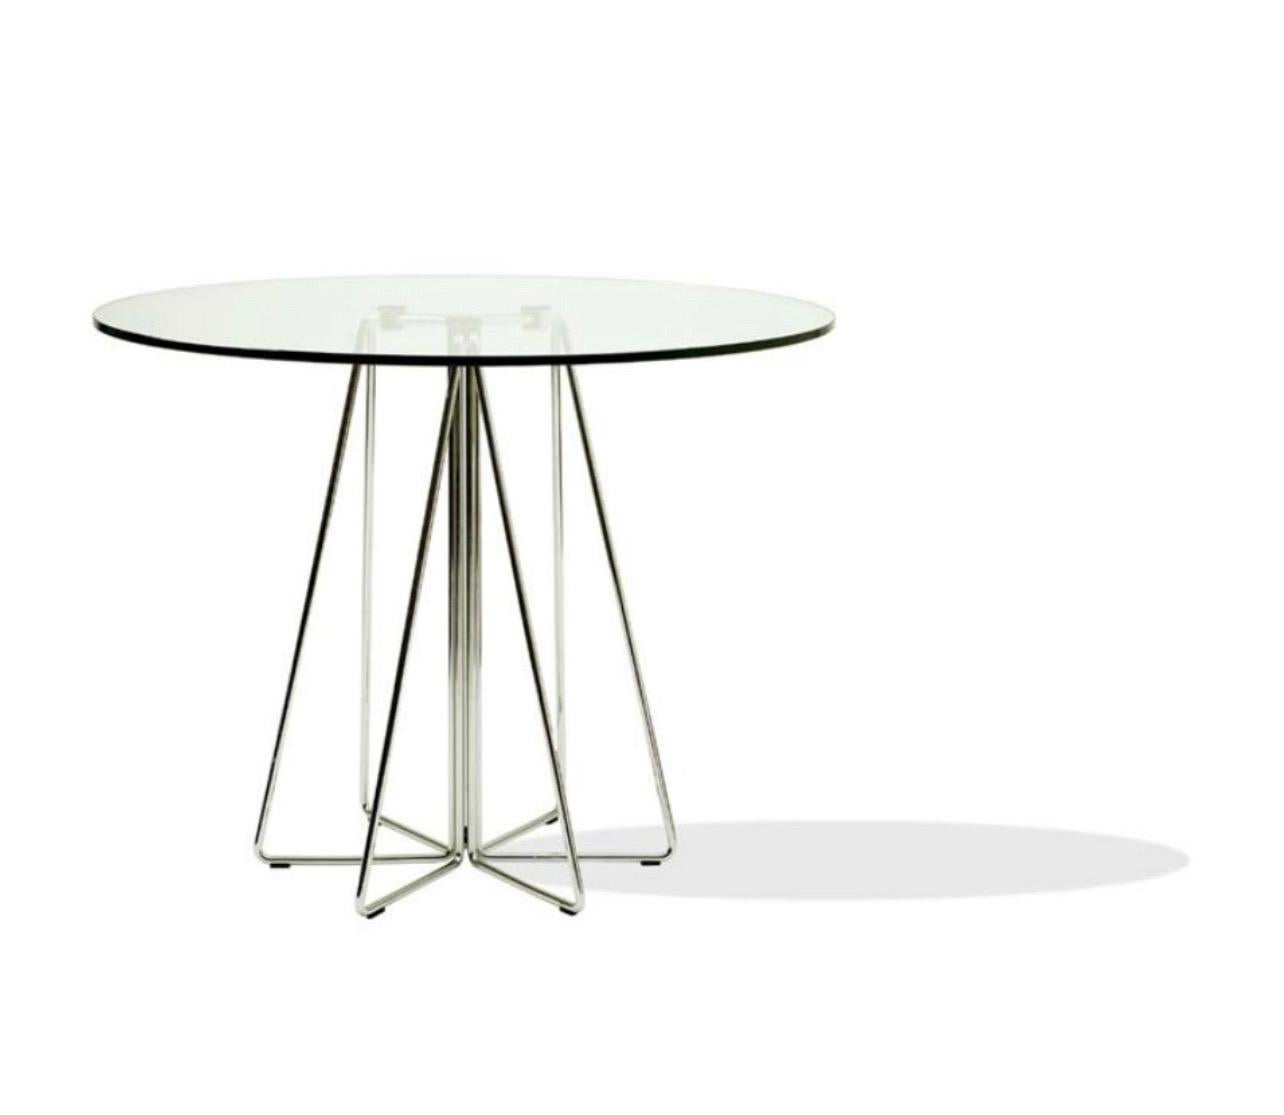 Italian Knoll Glass & Chrome Paperclip Dining Table by Massimo Vignelli